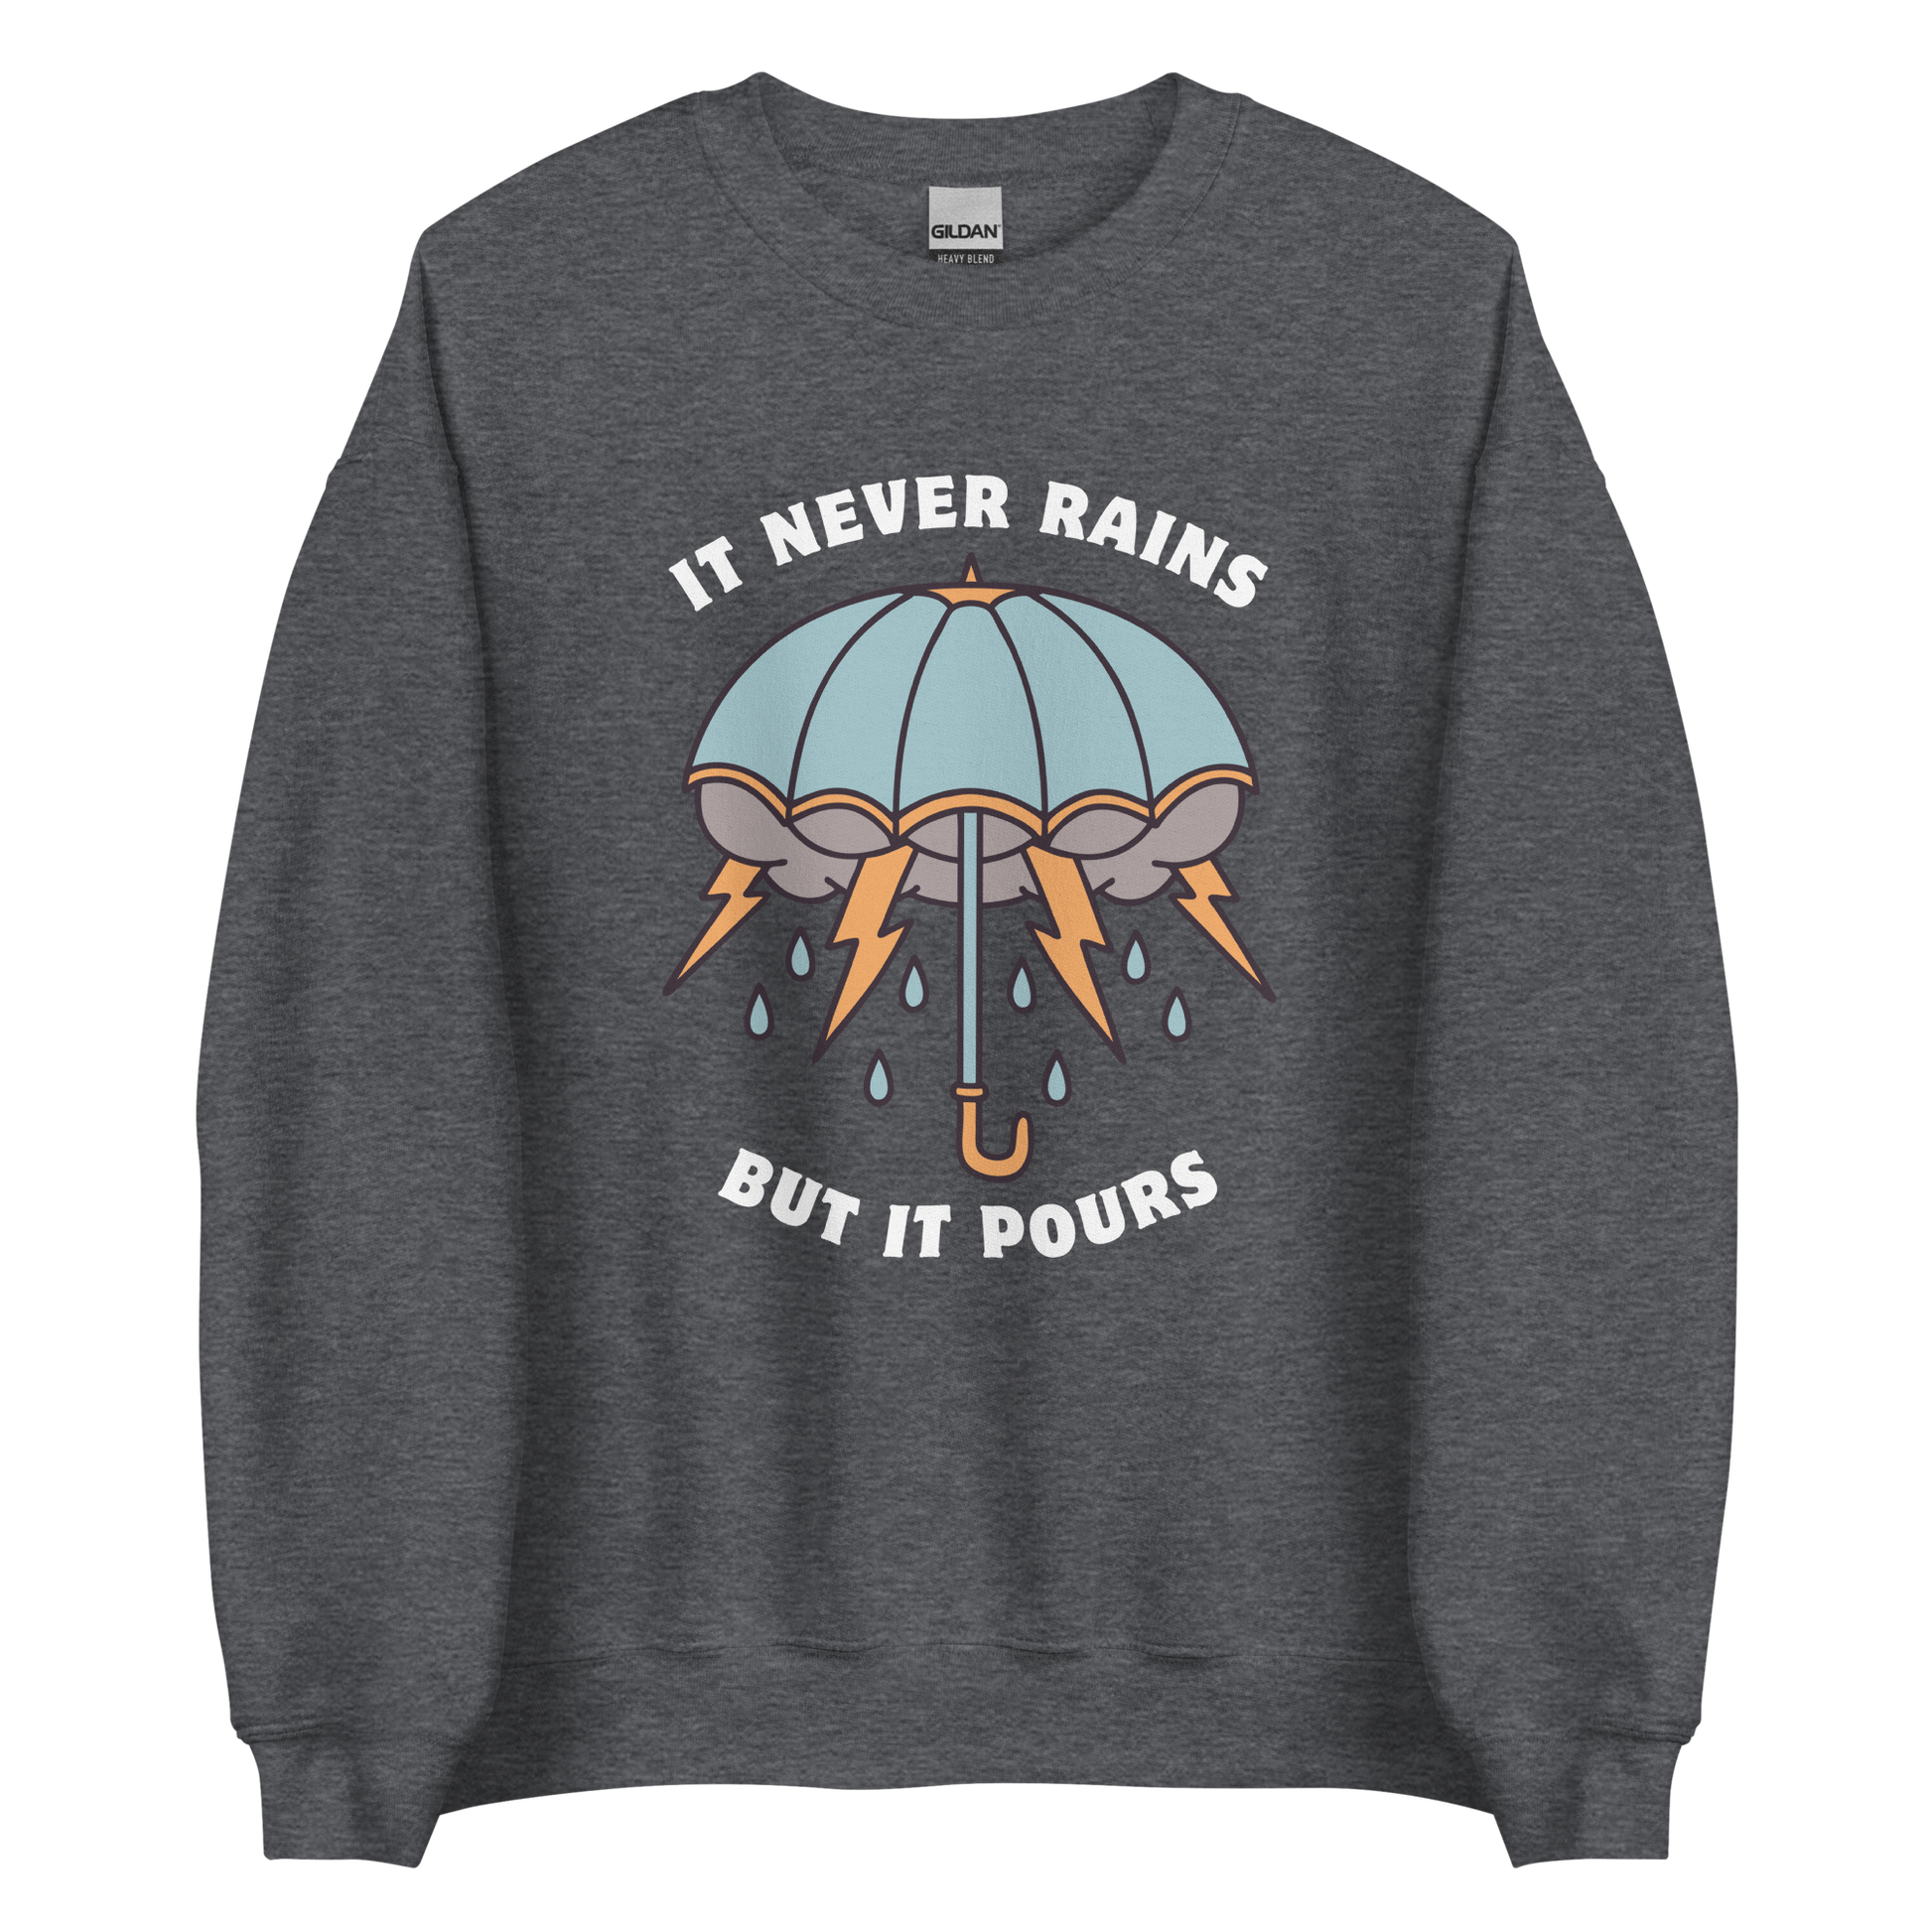 Dark Heather Umbrella Sweatshirt featuring a unique It Never Rains But It Pours graphic on the chest - Cool Tattoo-Inspired Graphic Umbrella Sweatshirts - Boozy Fox